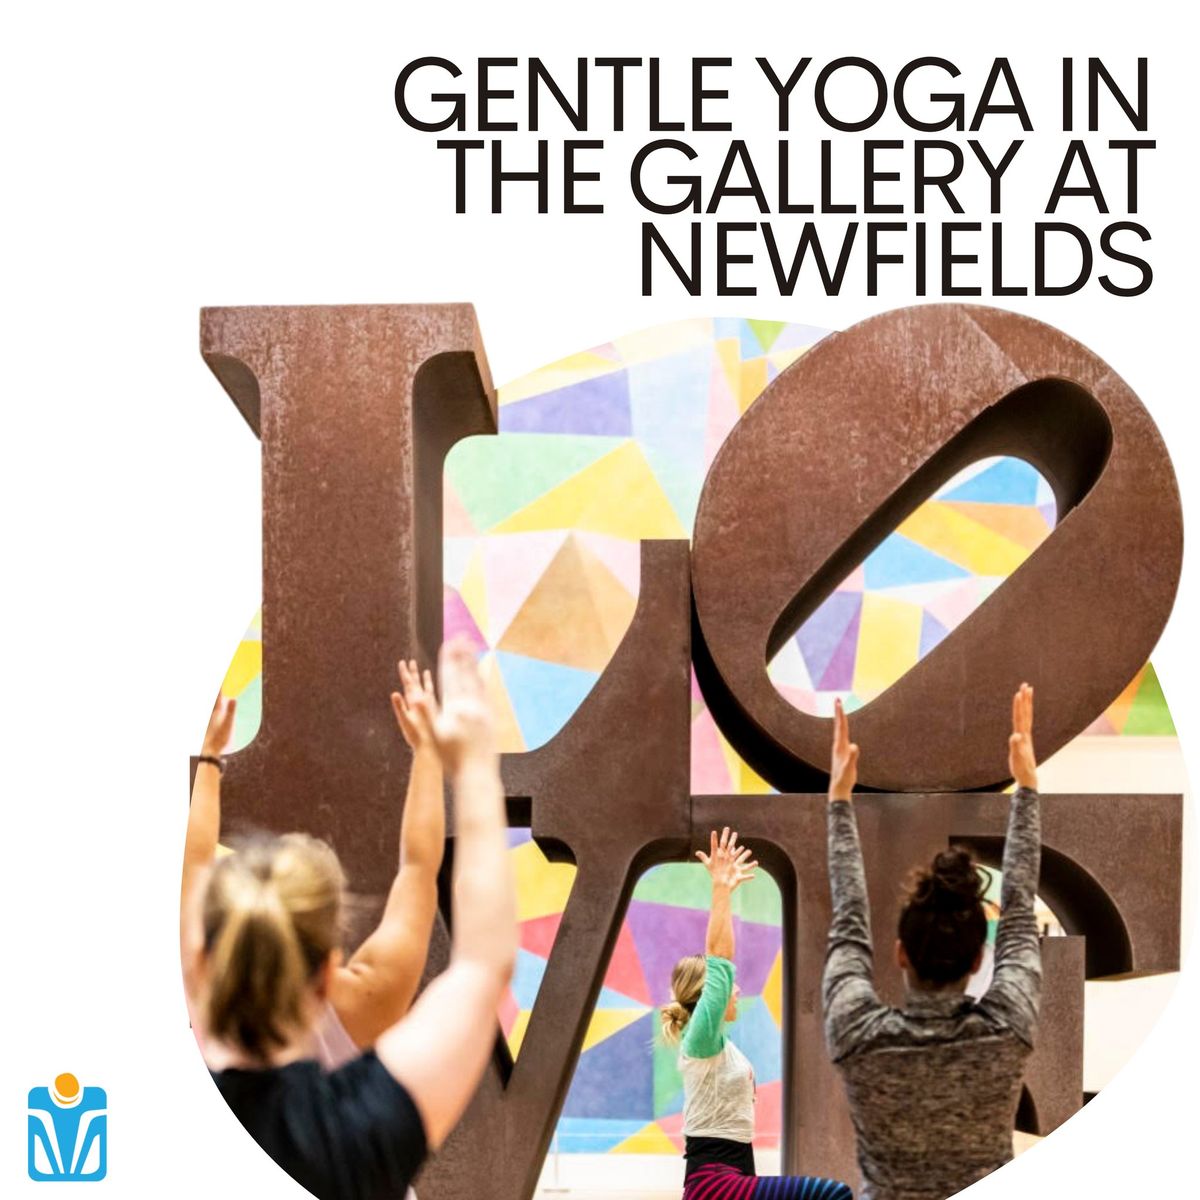 Gentle Yoga in the Gallery at Newfields